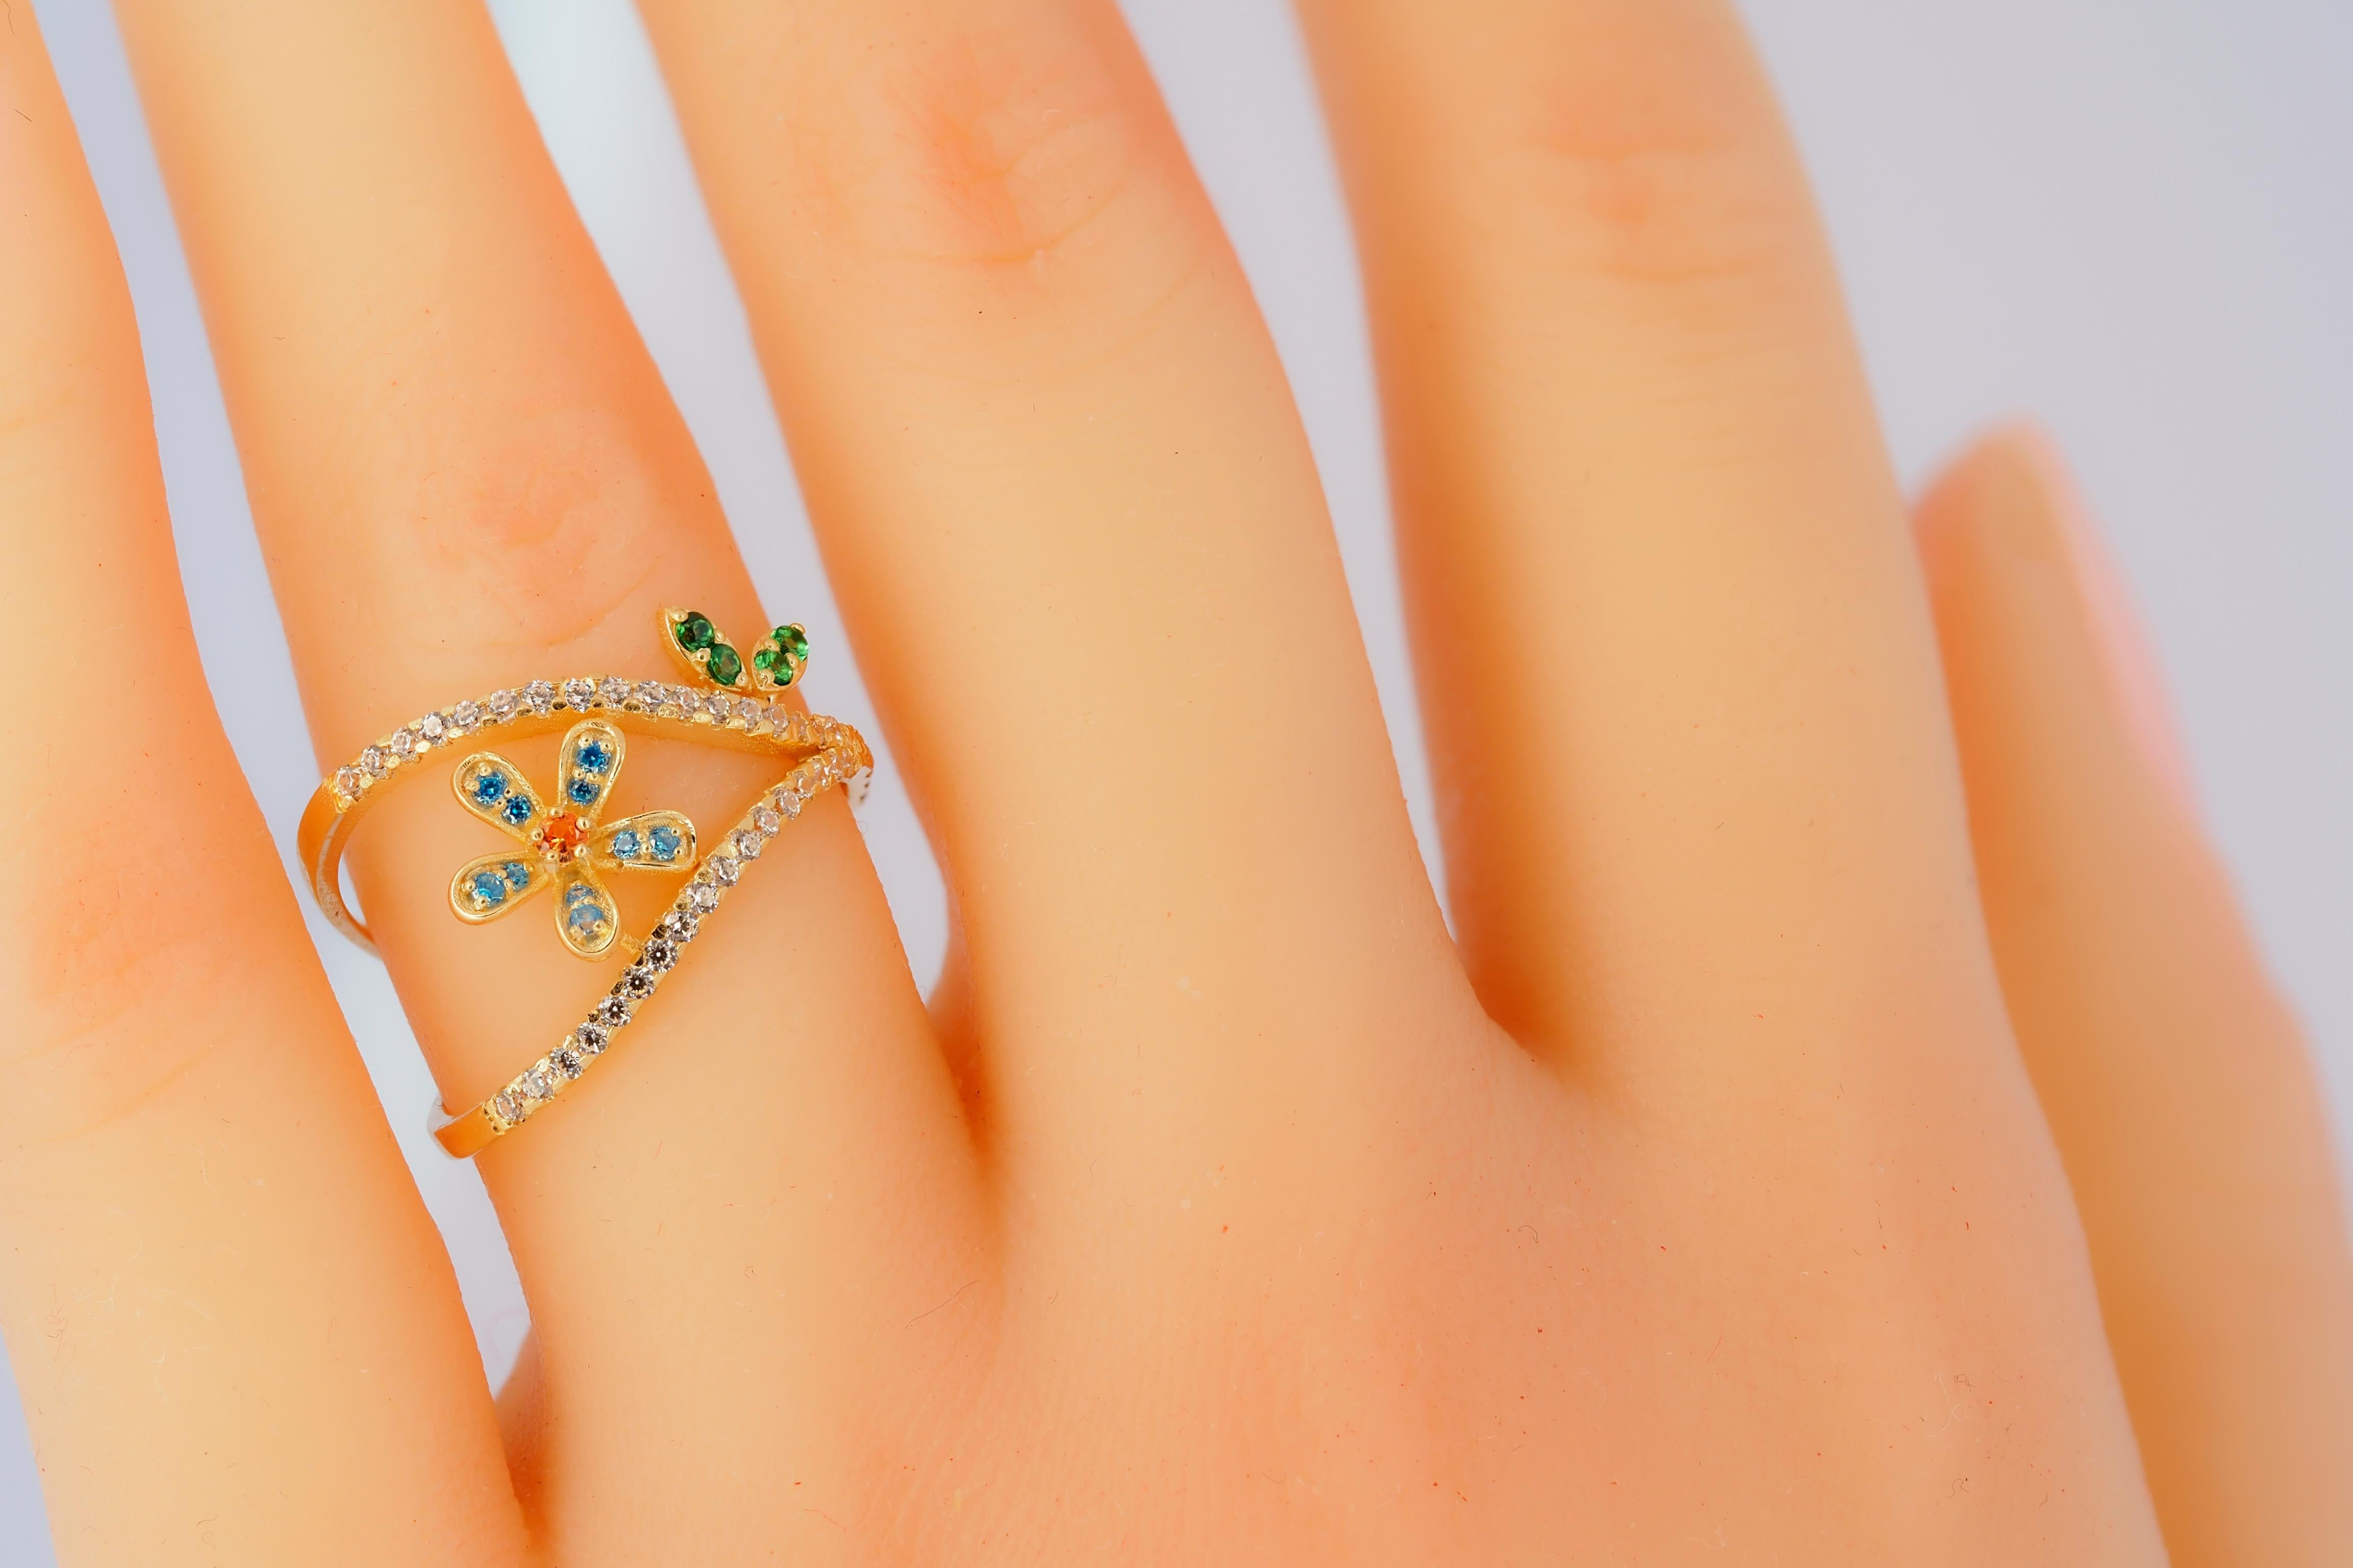 For Sale:  Blue Flower with leaves 14k gold ring. 6